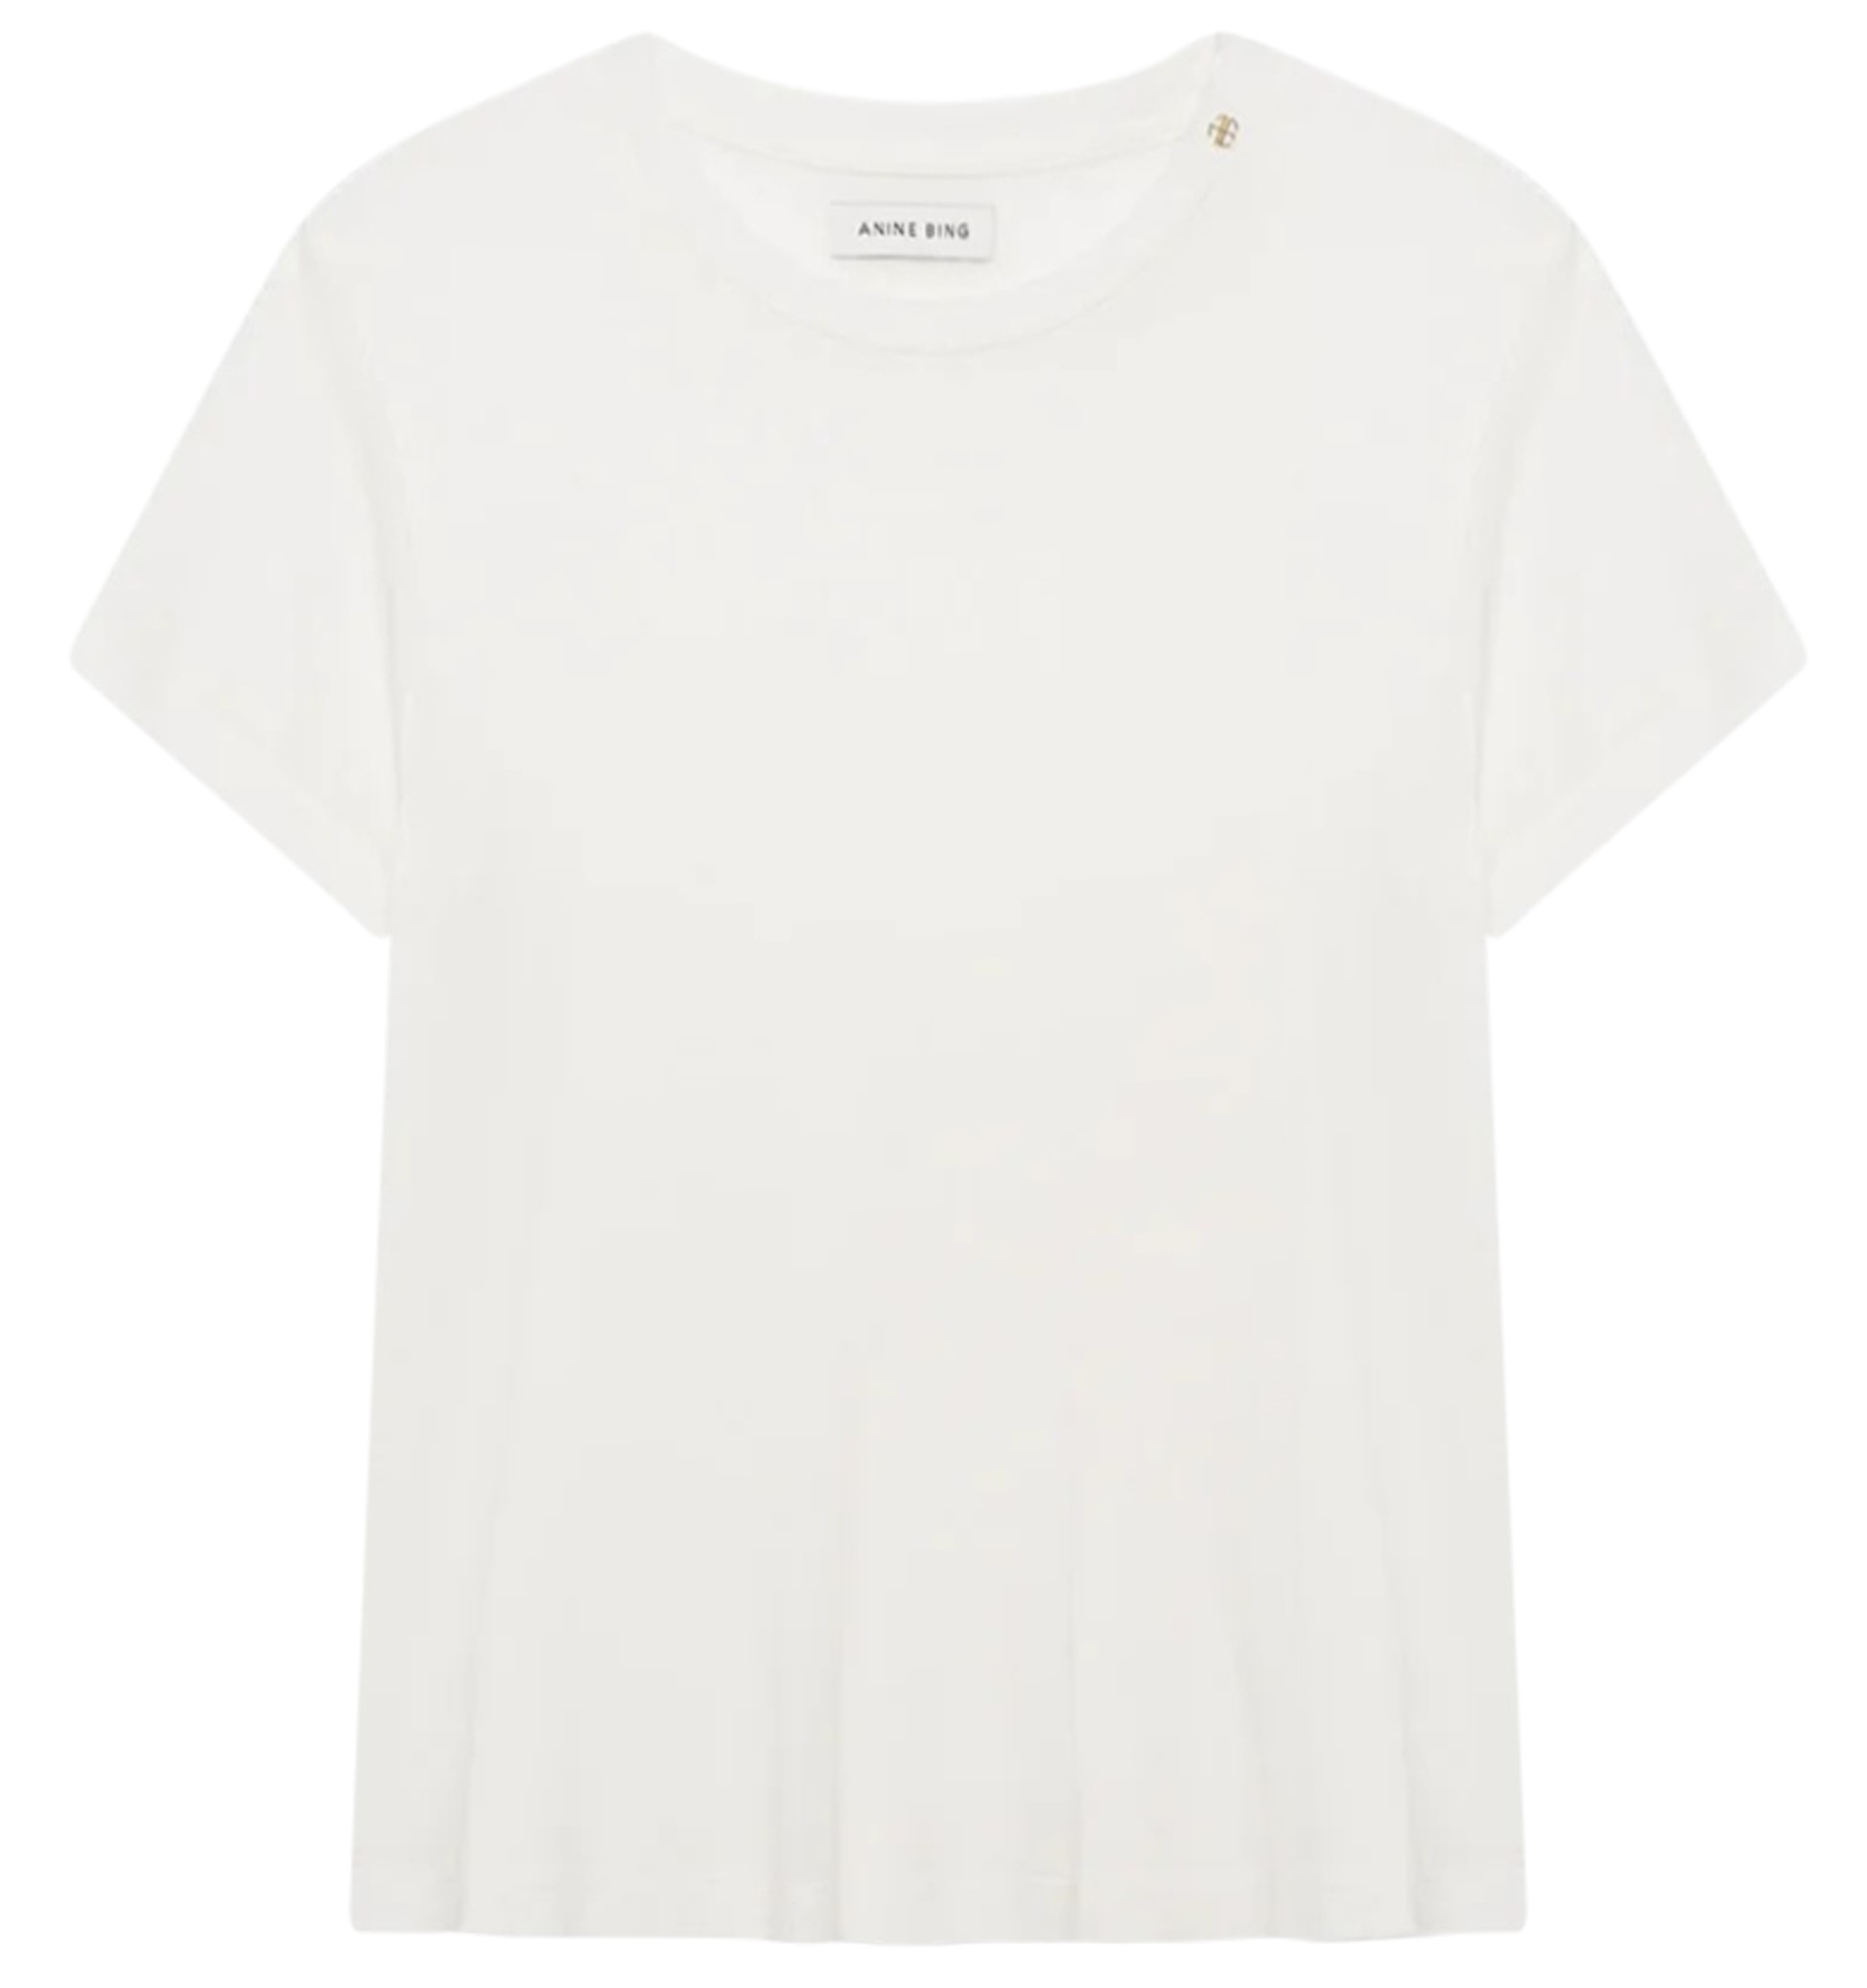 ANINE BING Amani Cashmere Blend Tee in Off White XS